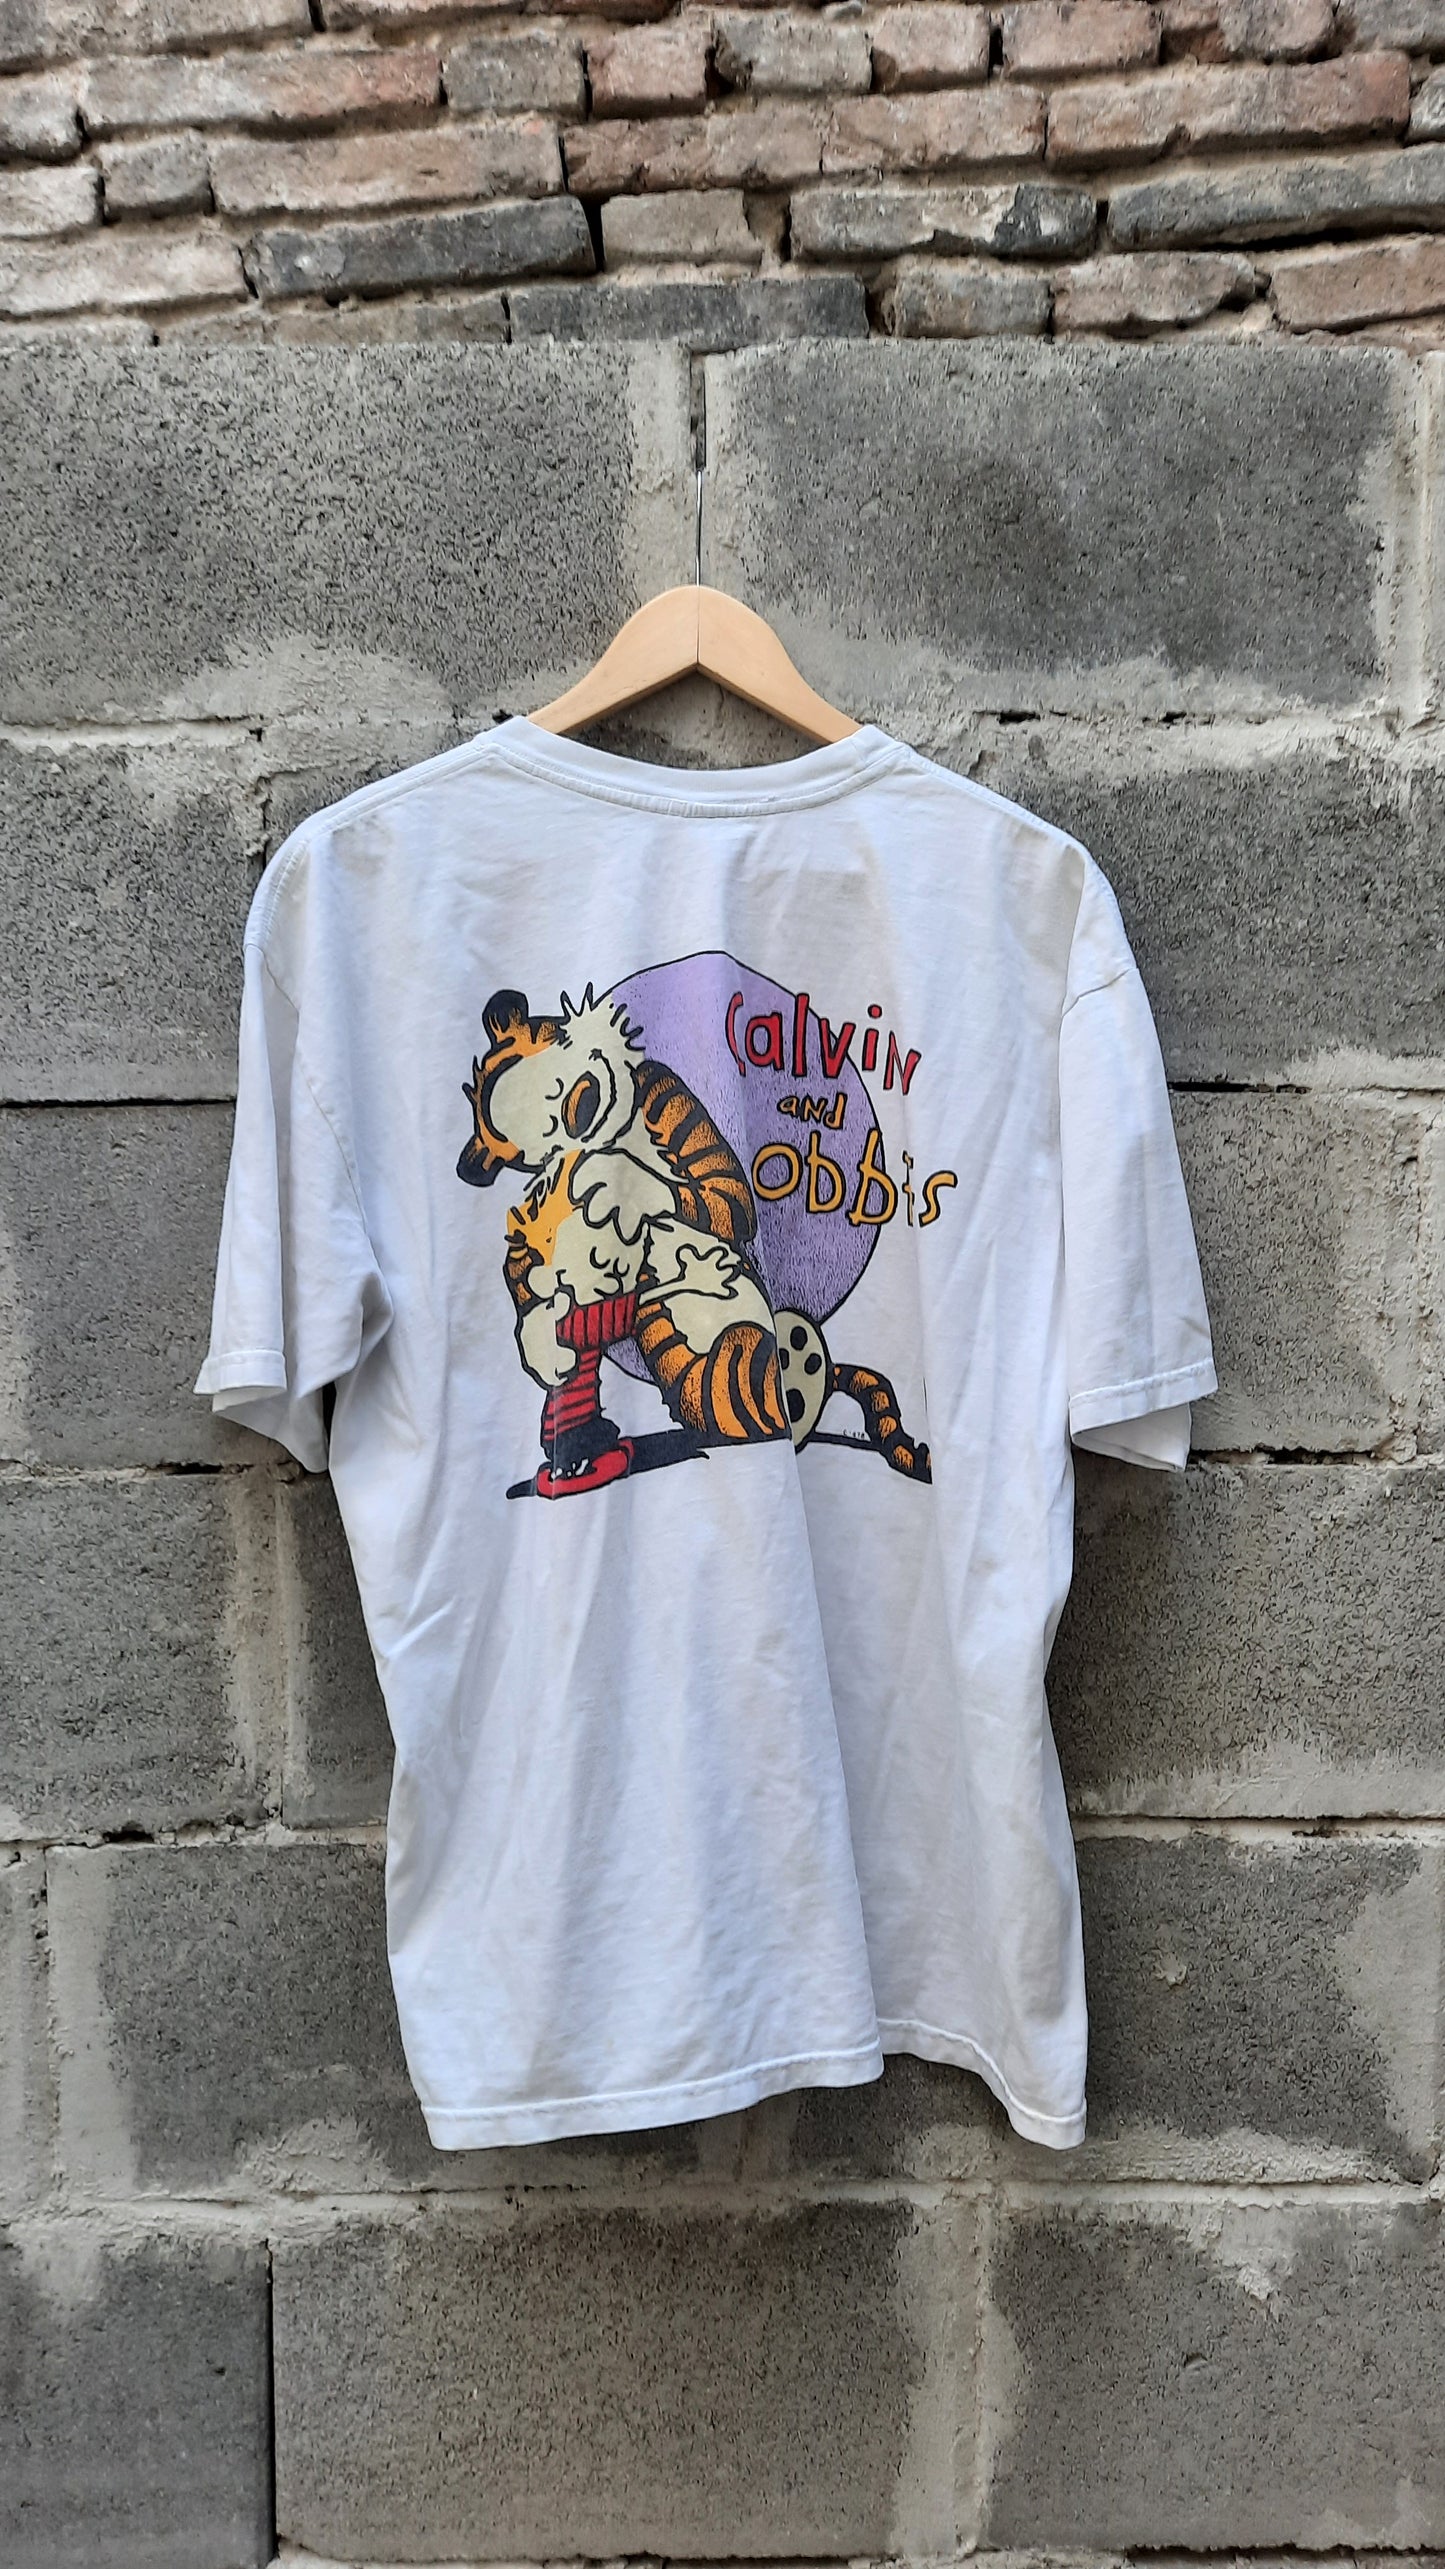 Vintage Calvin and Hobbes T-shirt